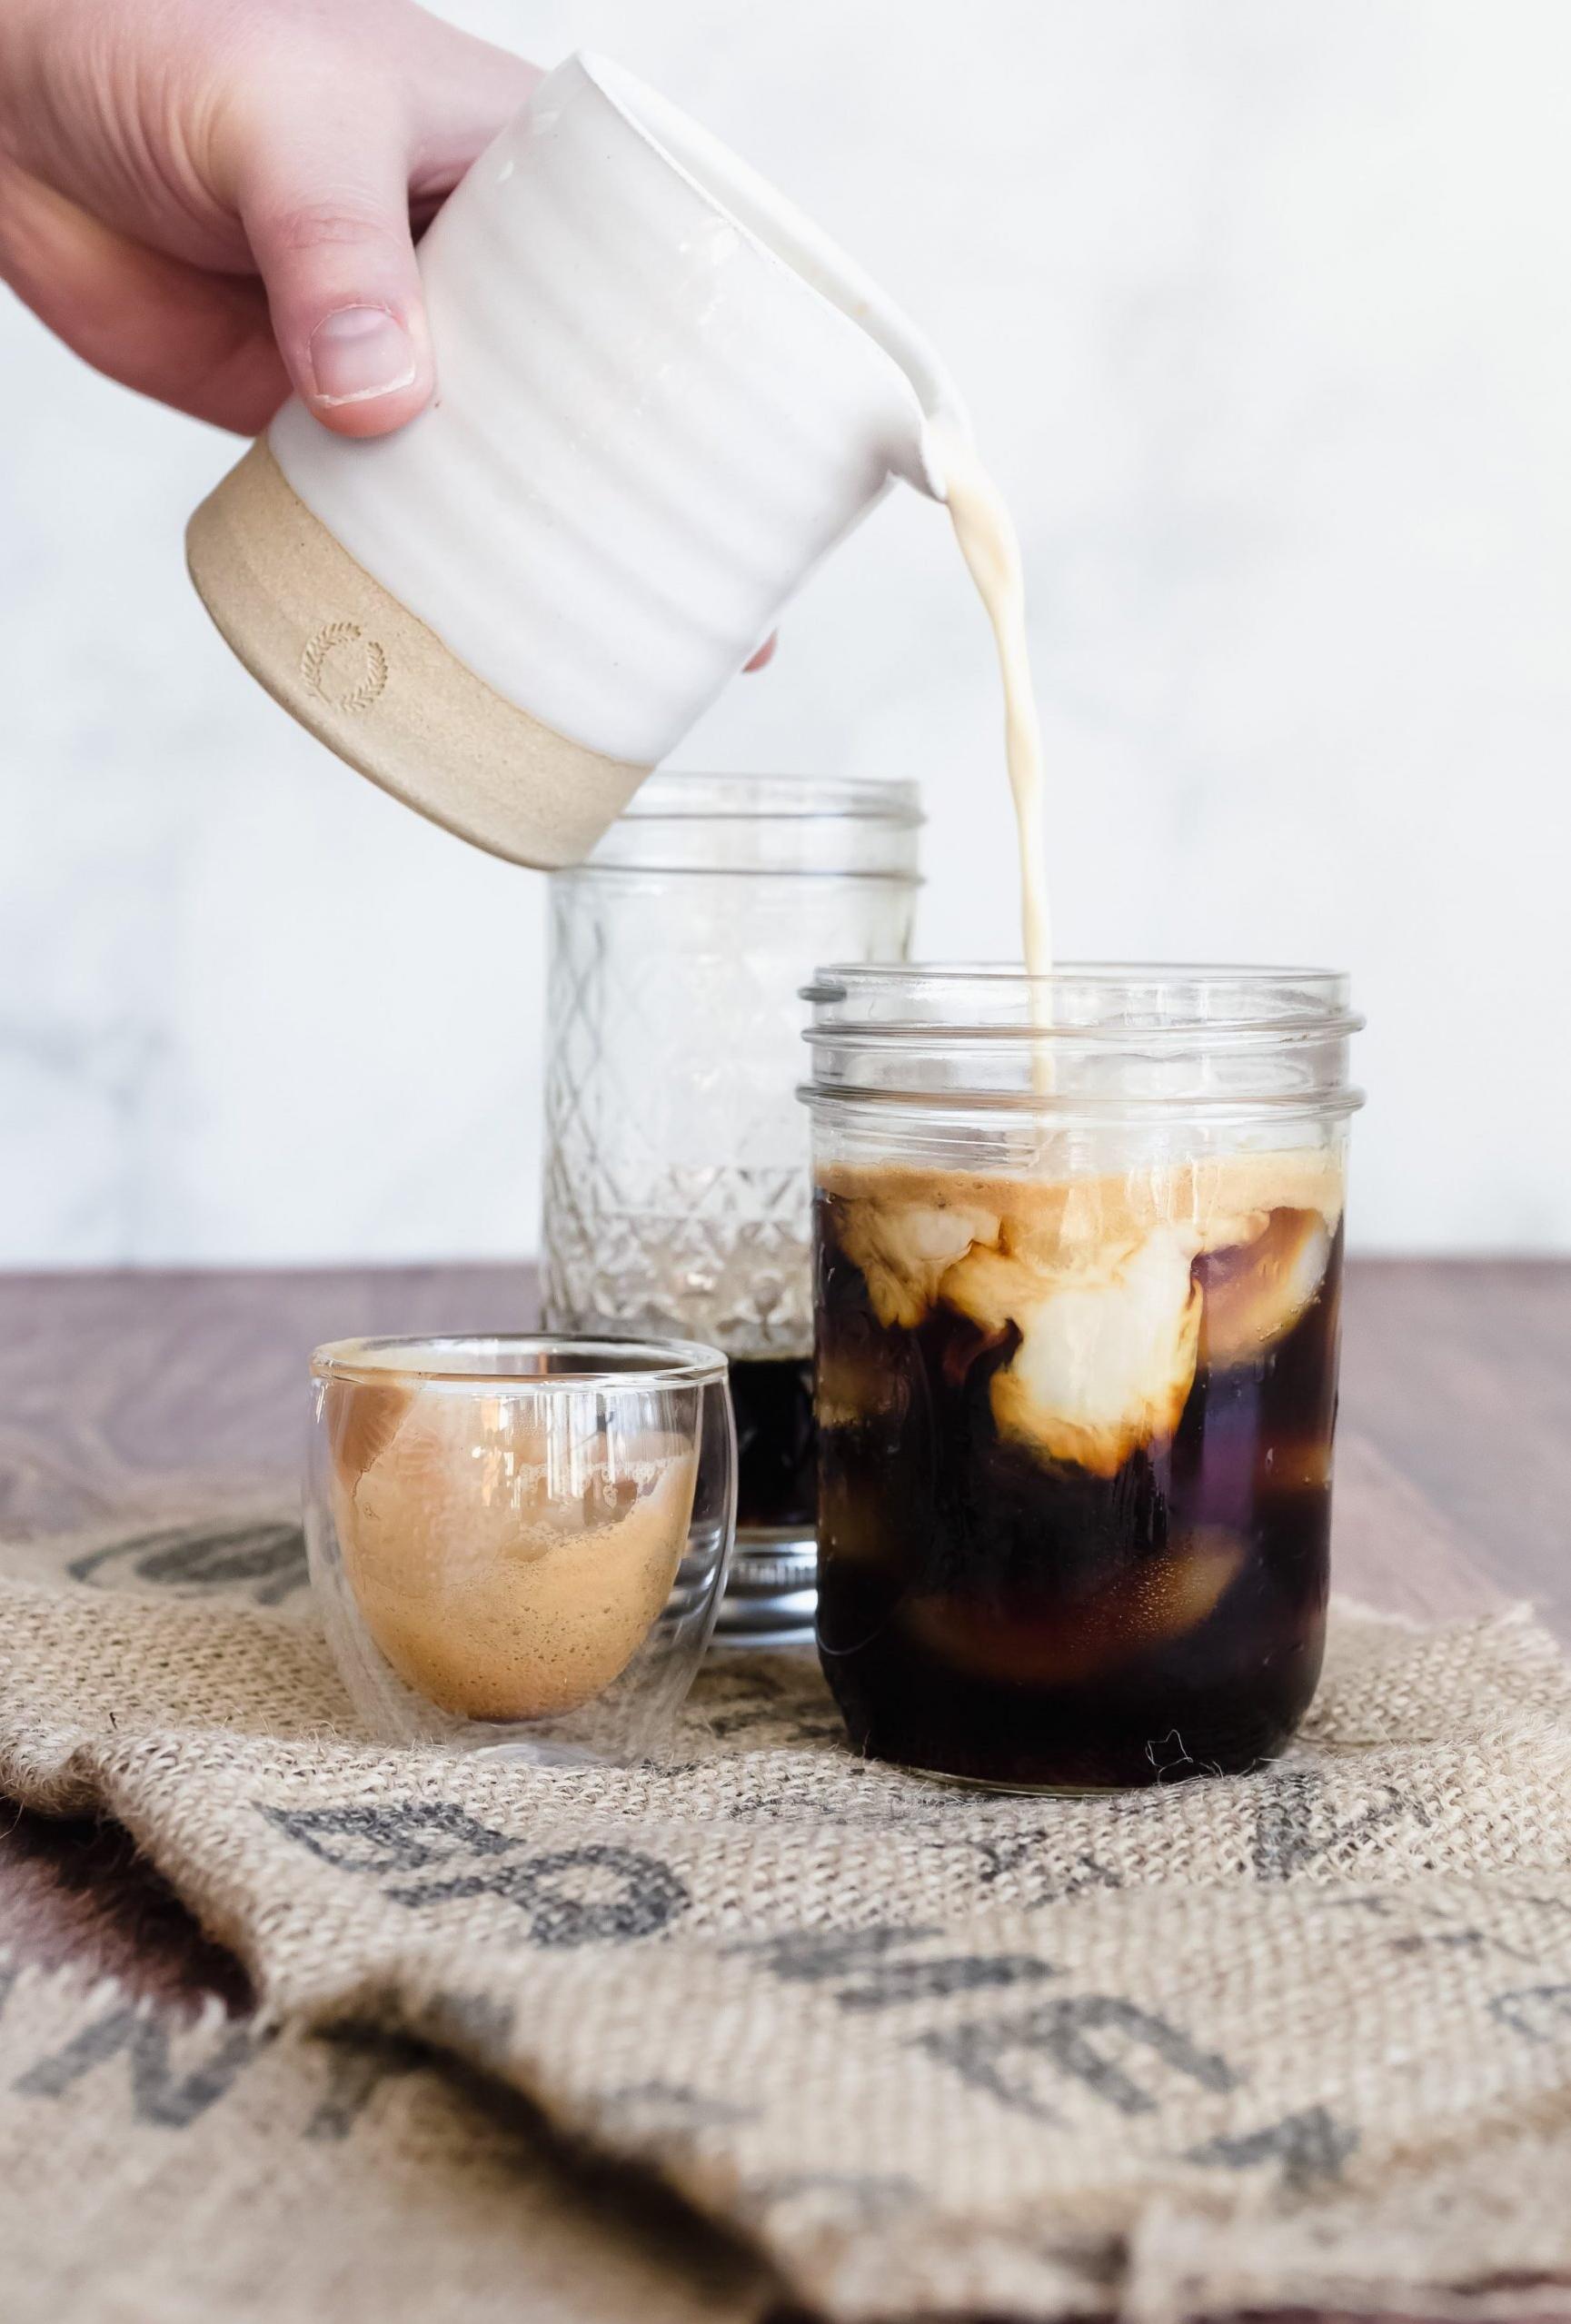  Beat the heat and caffeinate with our deliciously smooth Iced Espresso Latte.